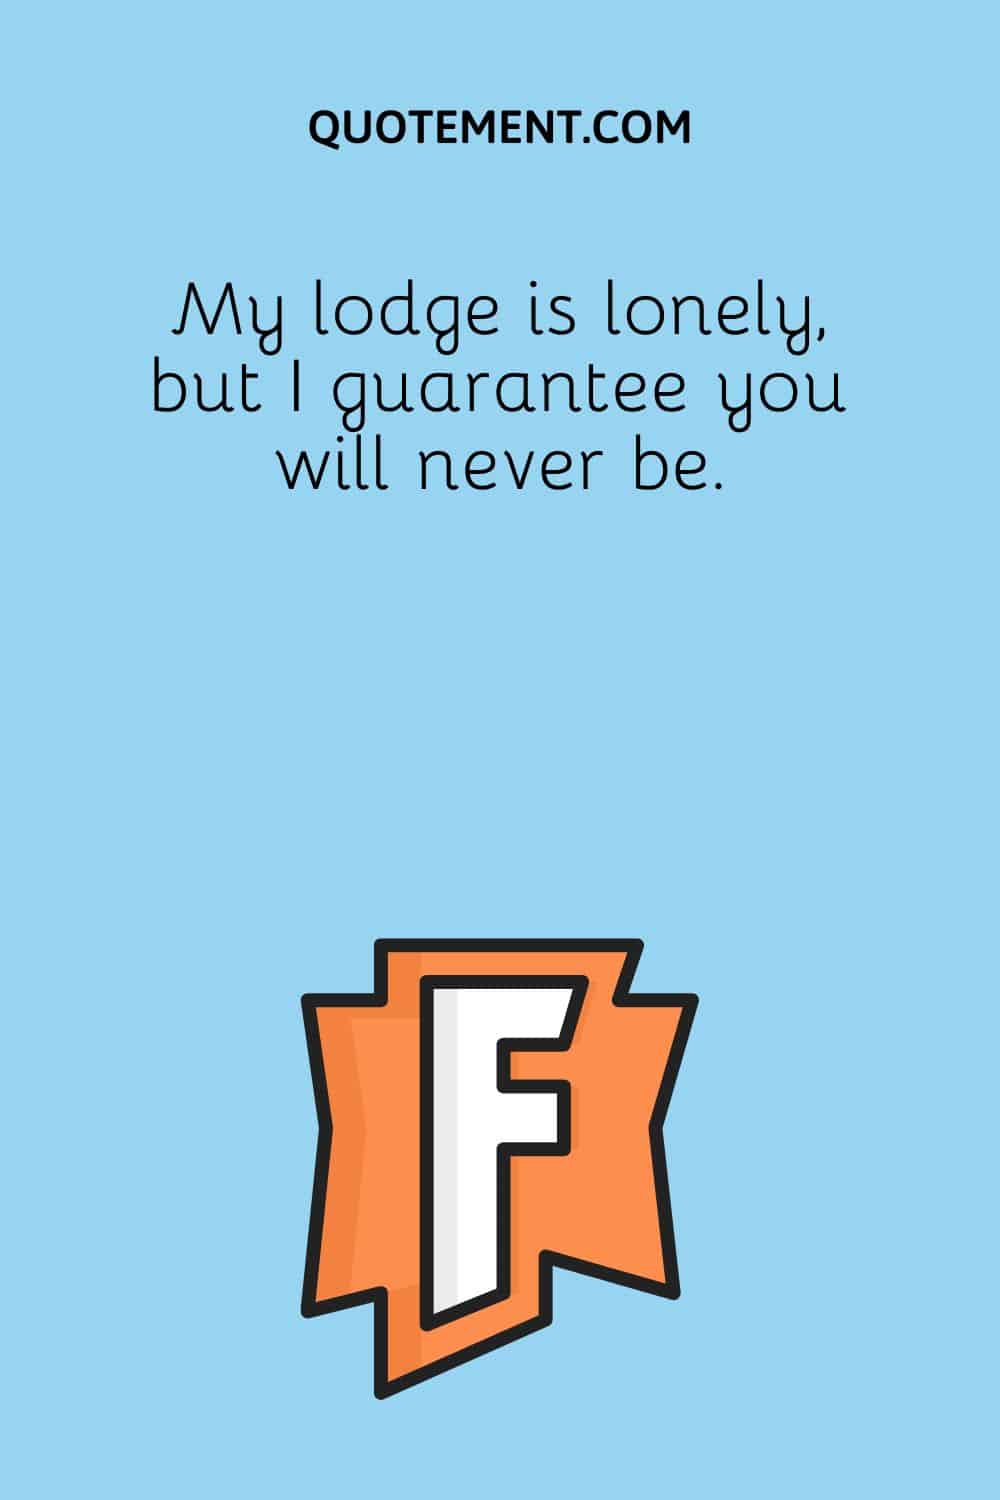 My lodge is lonely, but I guarantee you will never be